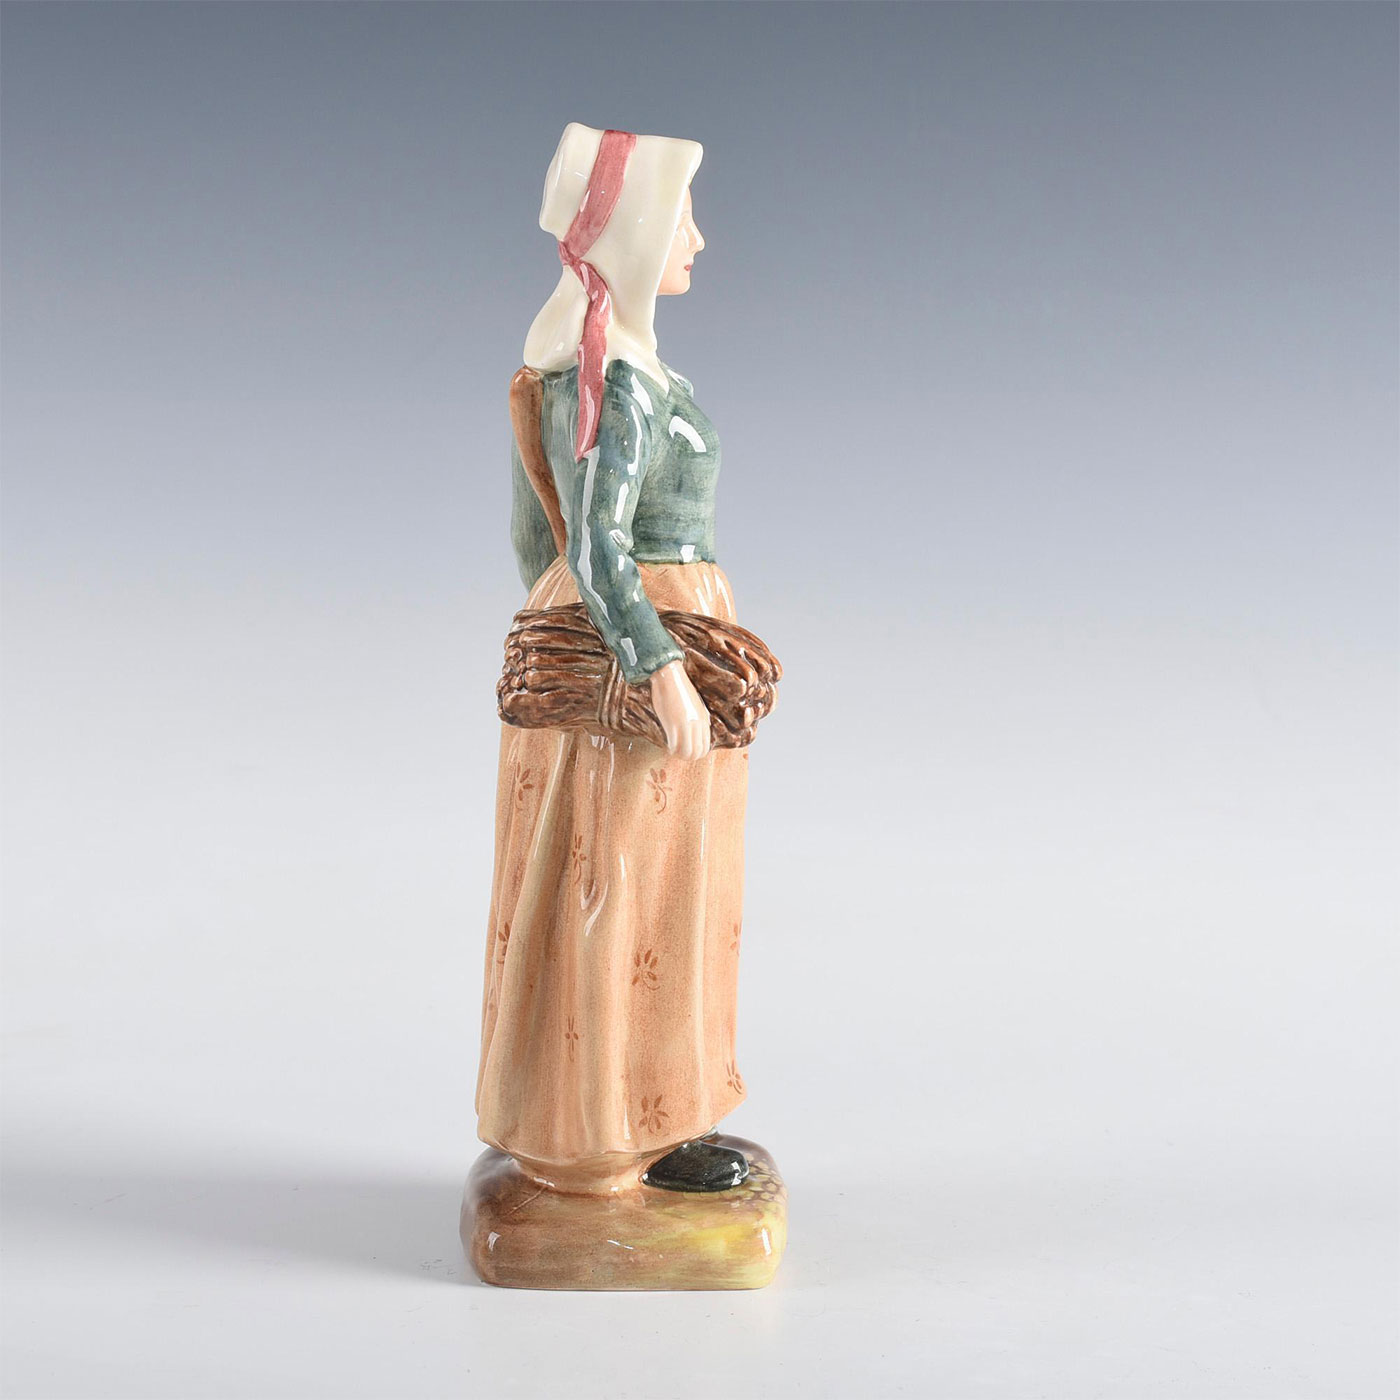 ROYAL DOULTON PORCELAIN FIGURE, FRENCH PEASANT - Image 4 of 5